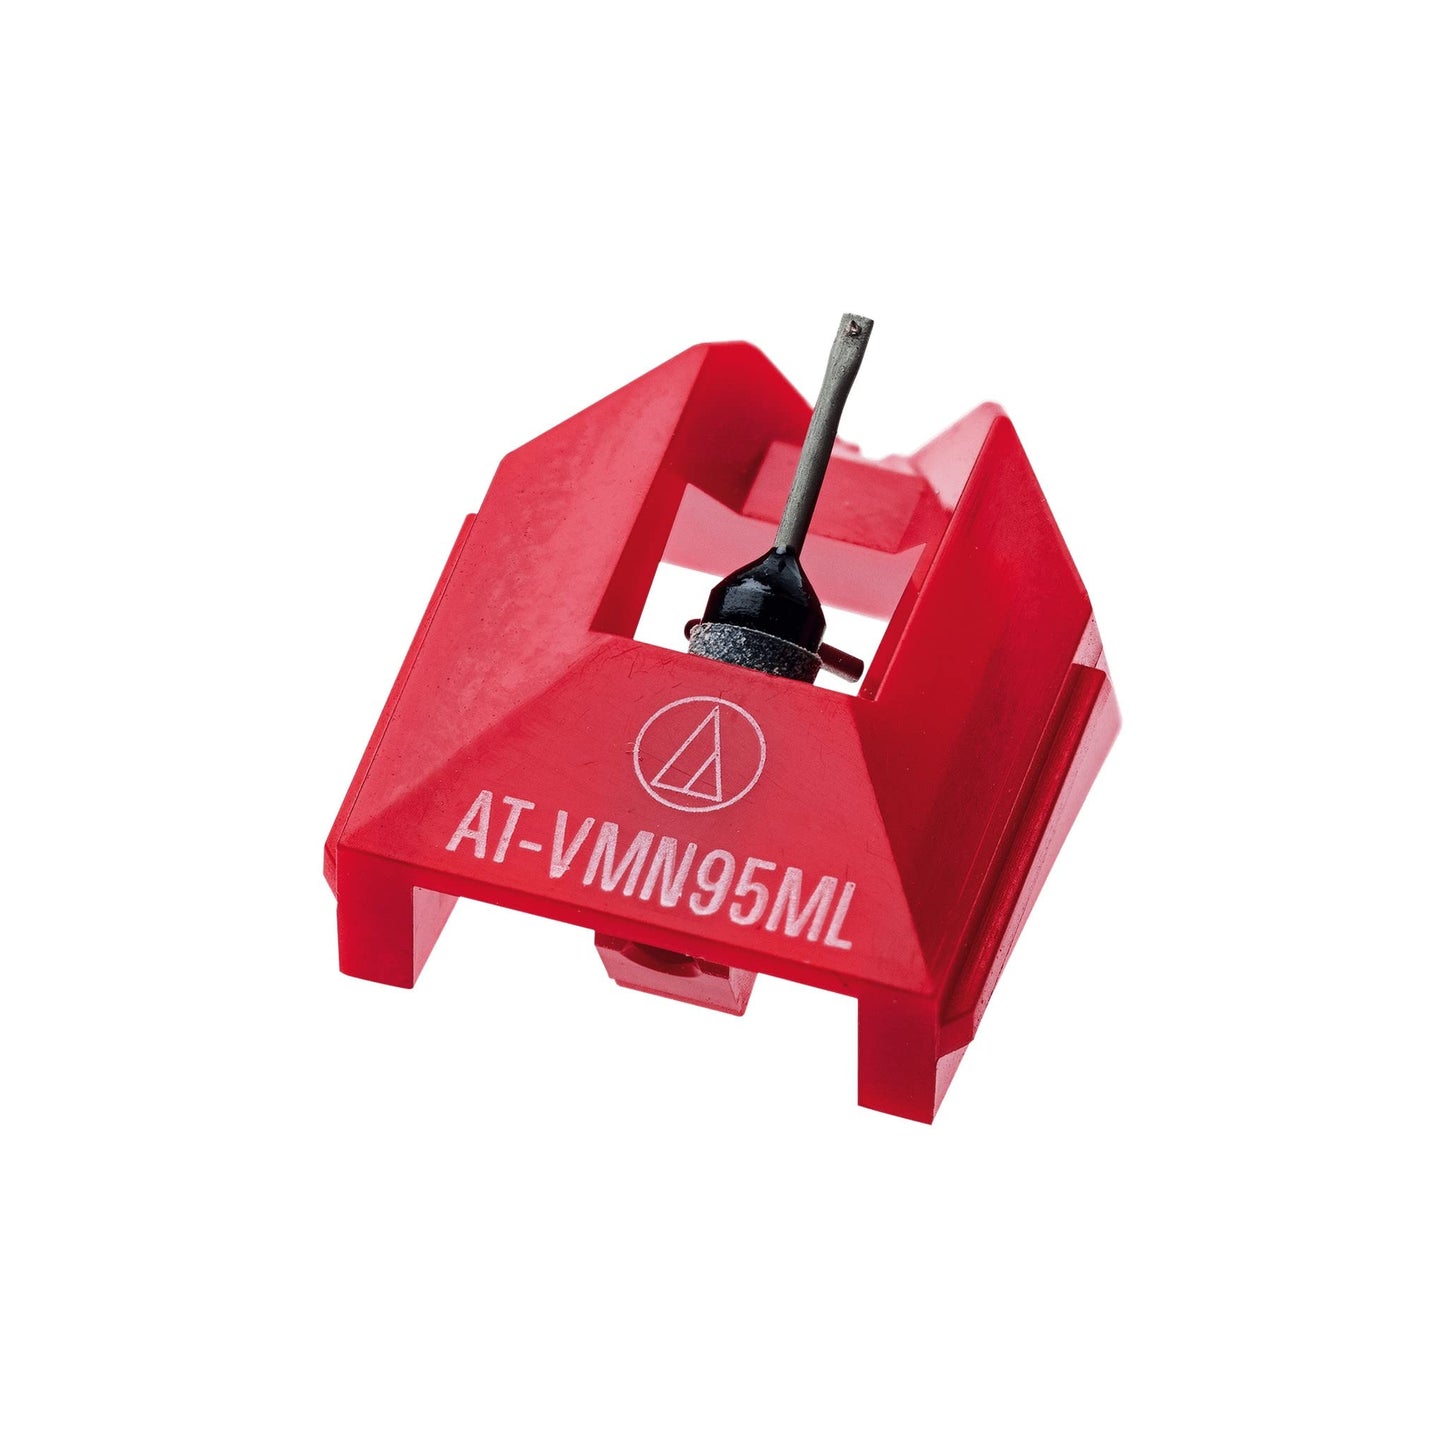 Audio-Technica AT-VMN95ML Replacement Stylus for AT-VM95ML